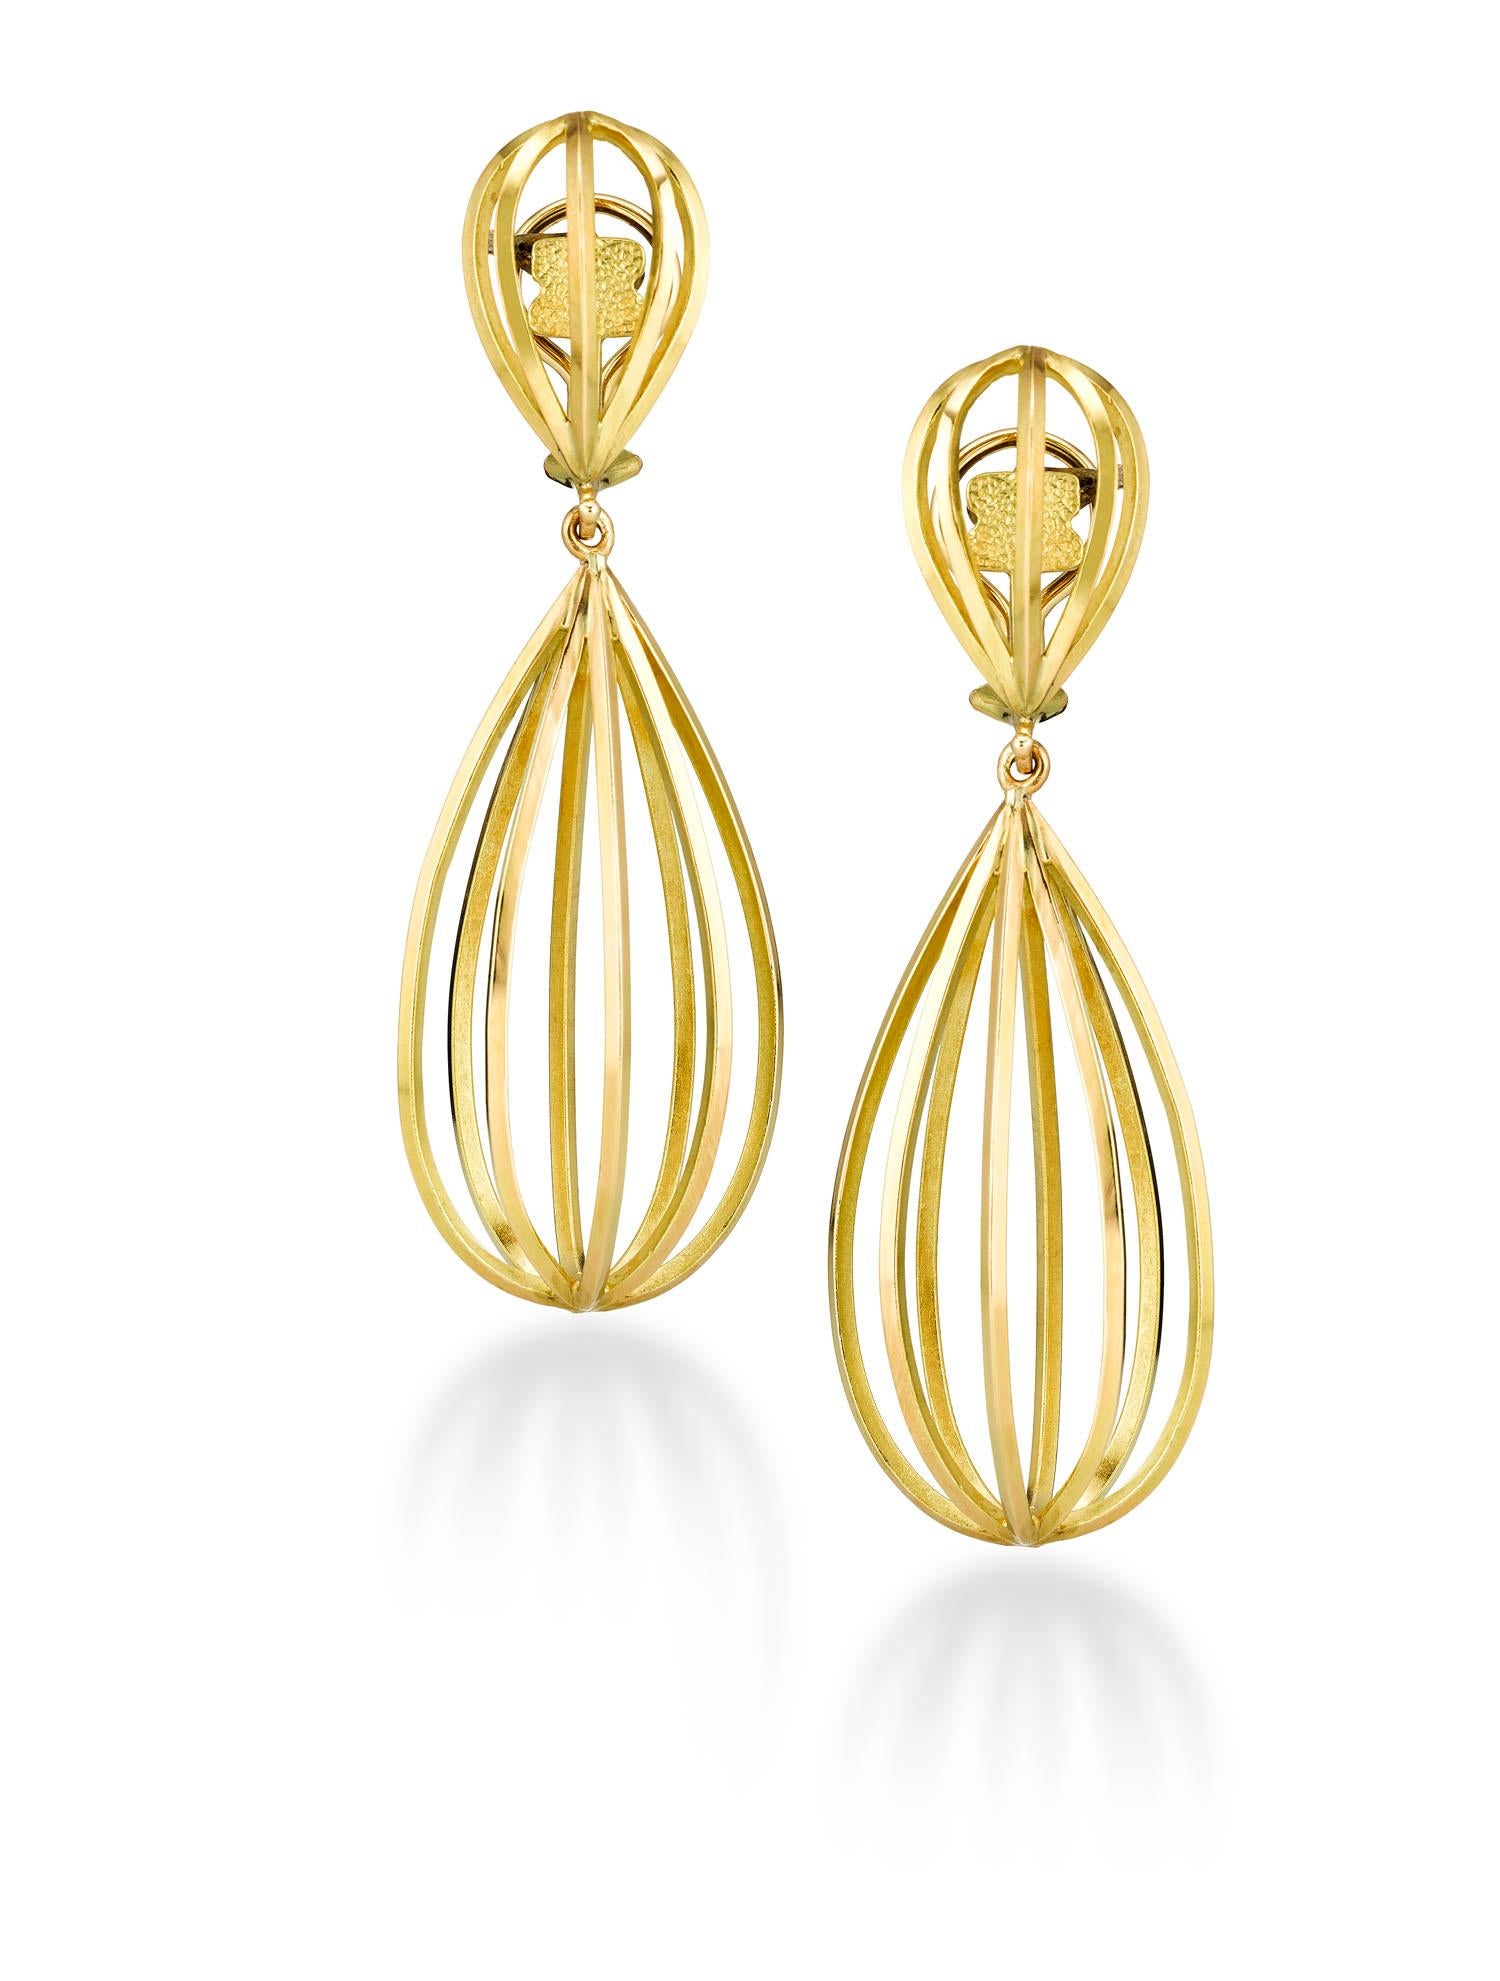 Architectural ear pendants in 18k yellow gold. Inspired by the spectacular cross beams of gothic ceilings of medieval architecture, these earrings are decidedly modern. Clip on with french backs. A post can be added. 
